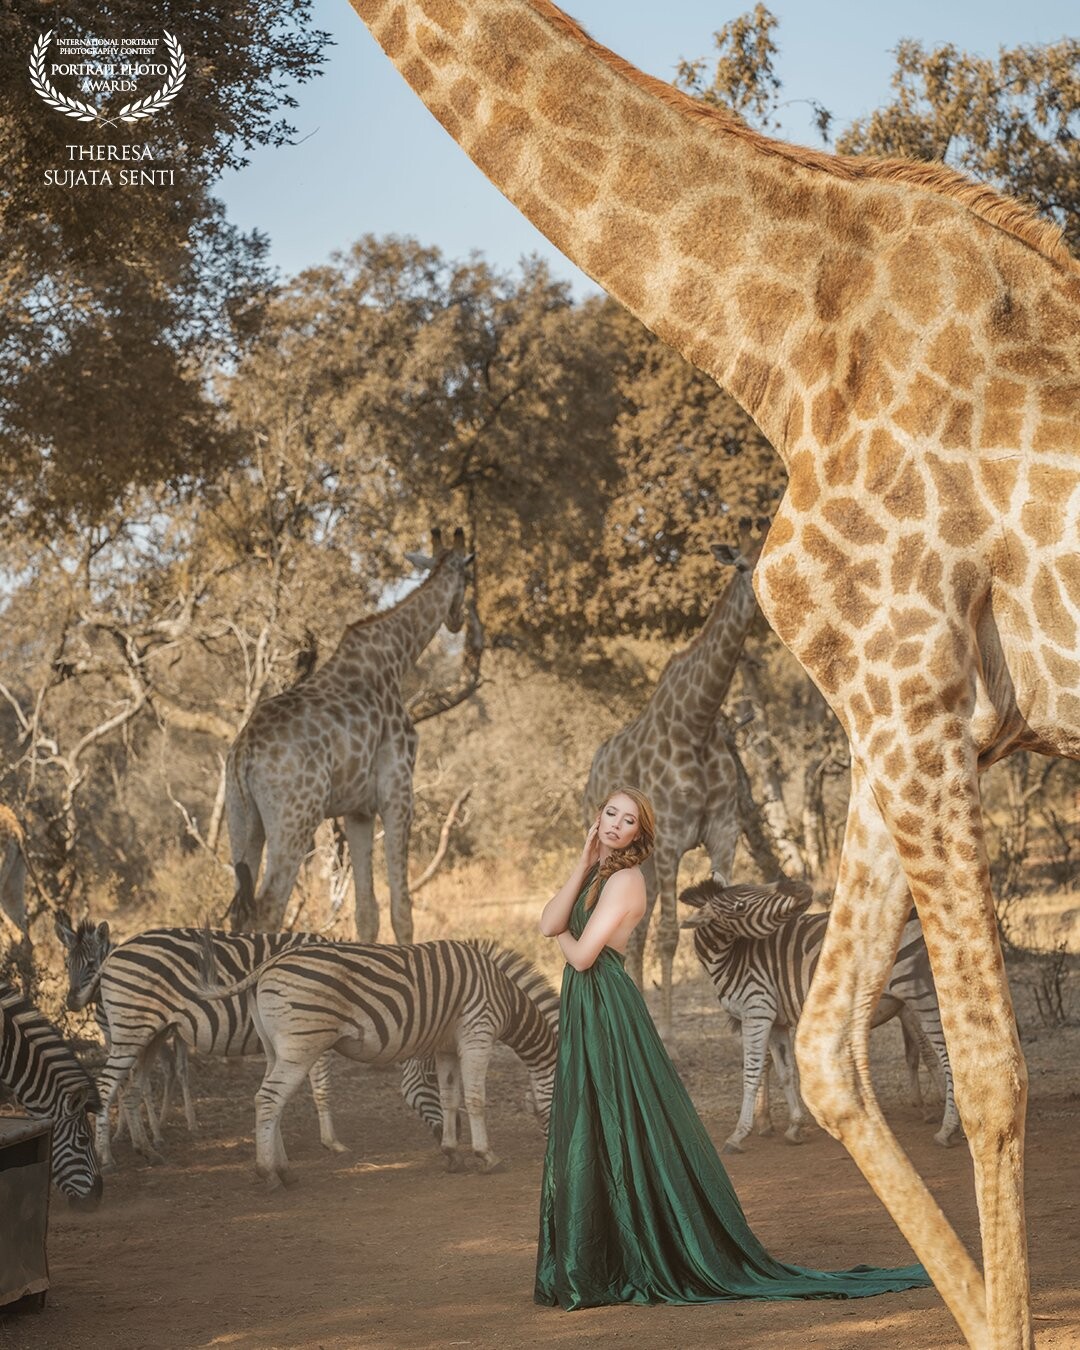 Photobombed by a giraffe. <br />
That’s what might happen, when you join my friend @nitschkephotography and me for a trip to South Africa. <br />
Usually, these animals are very shy and prefer to stay in the background but this time, not so much. ???<br />
Thanks to our beautiful model @mme_gingerella and @roseserenestudio for the amazing styling.